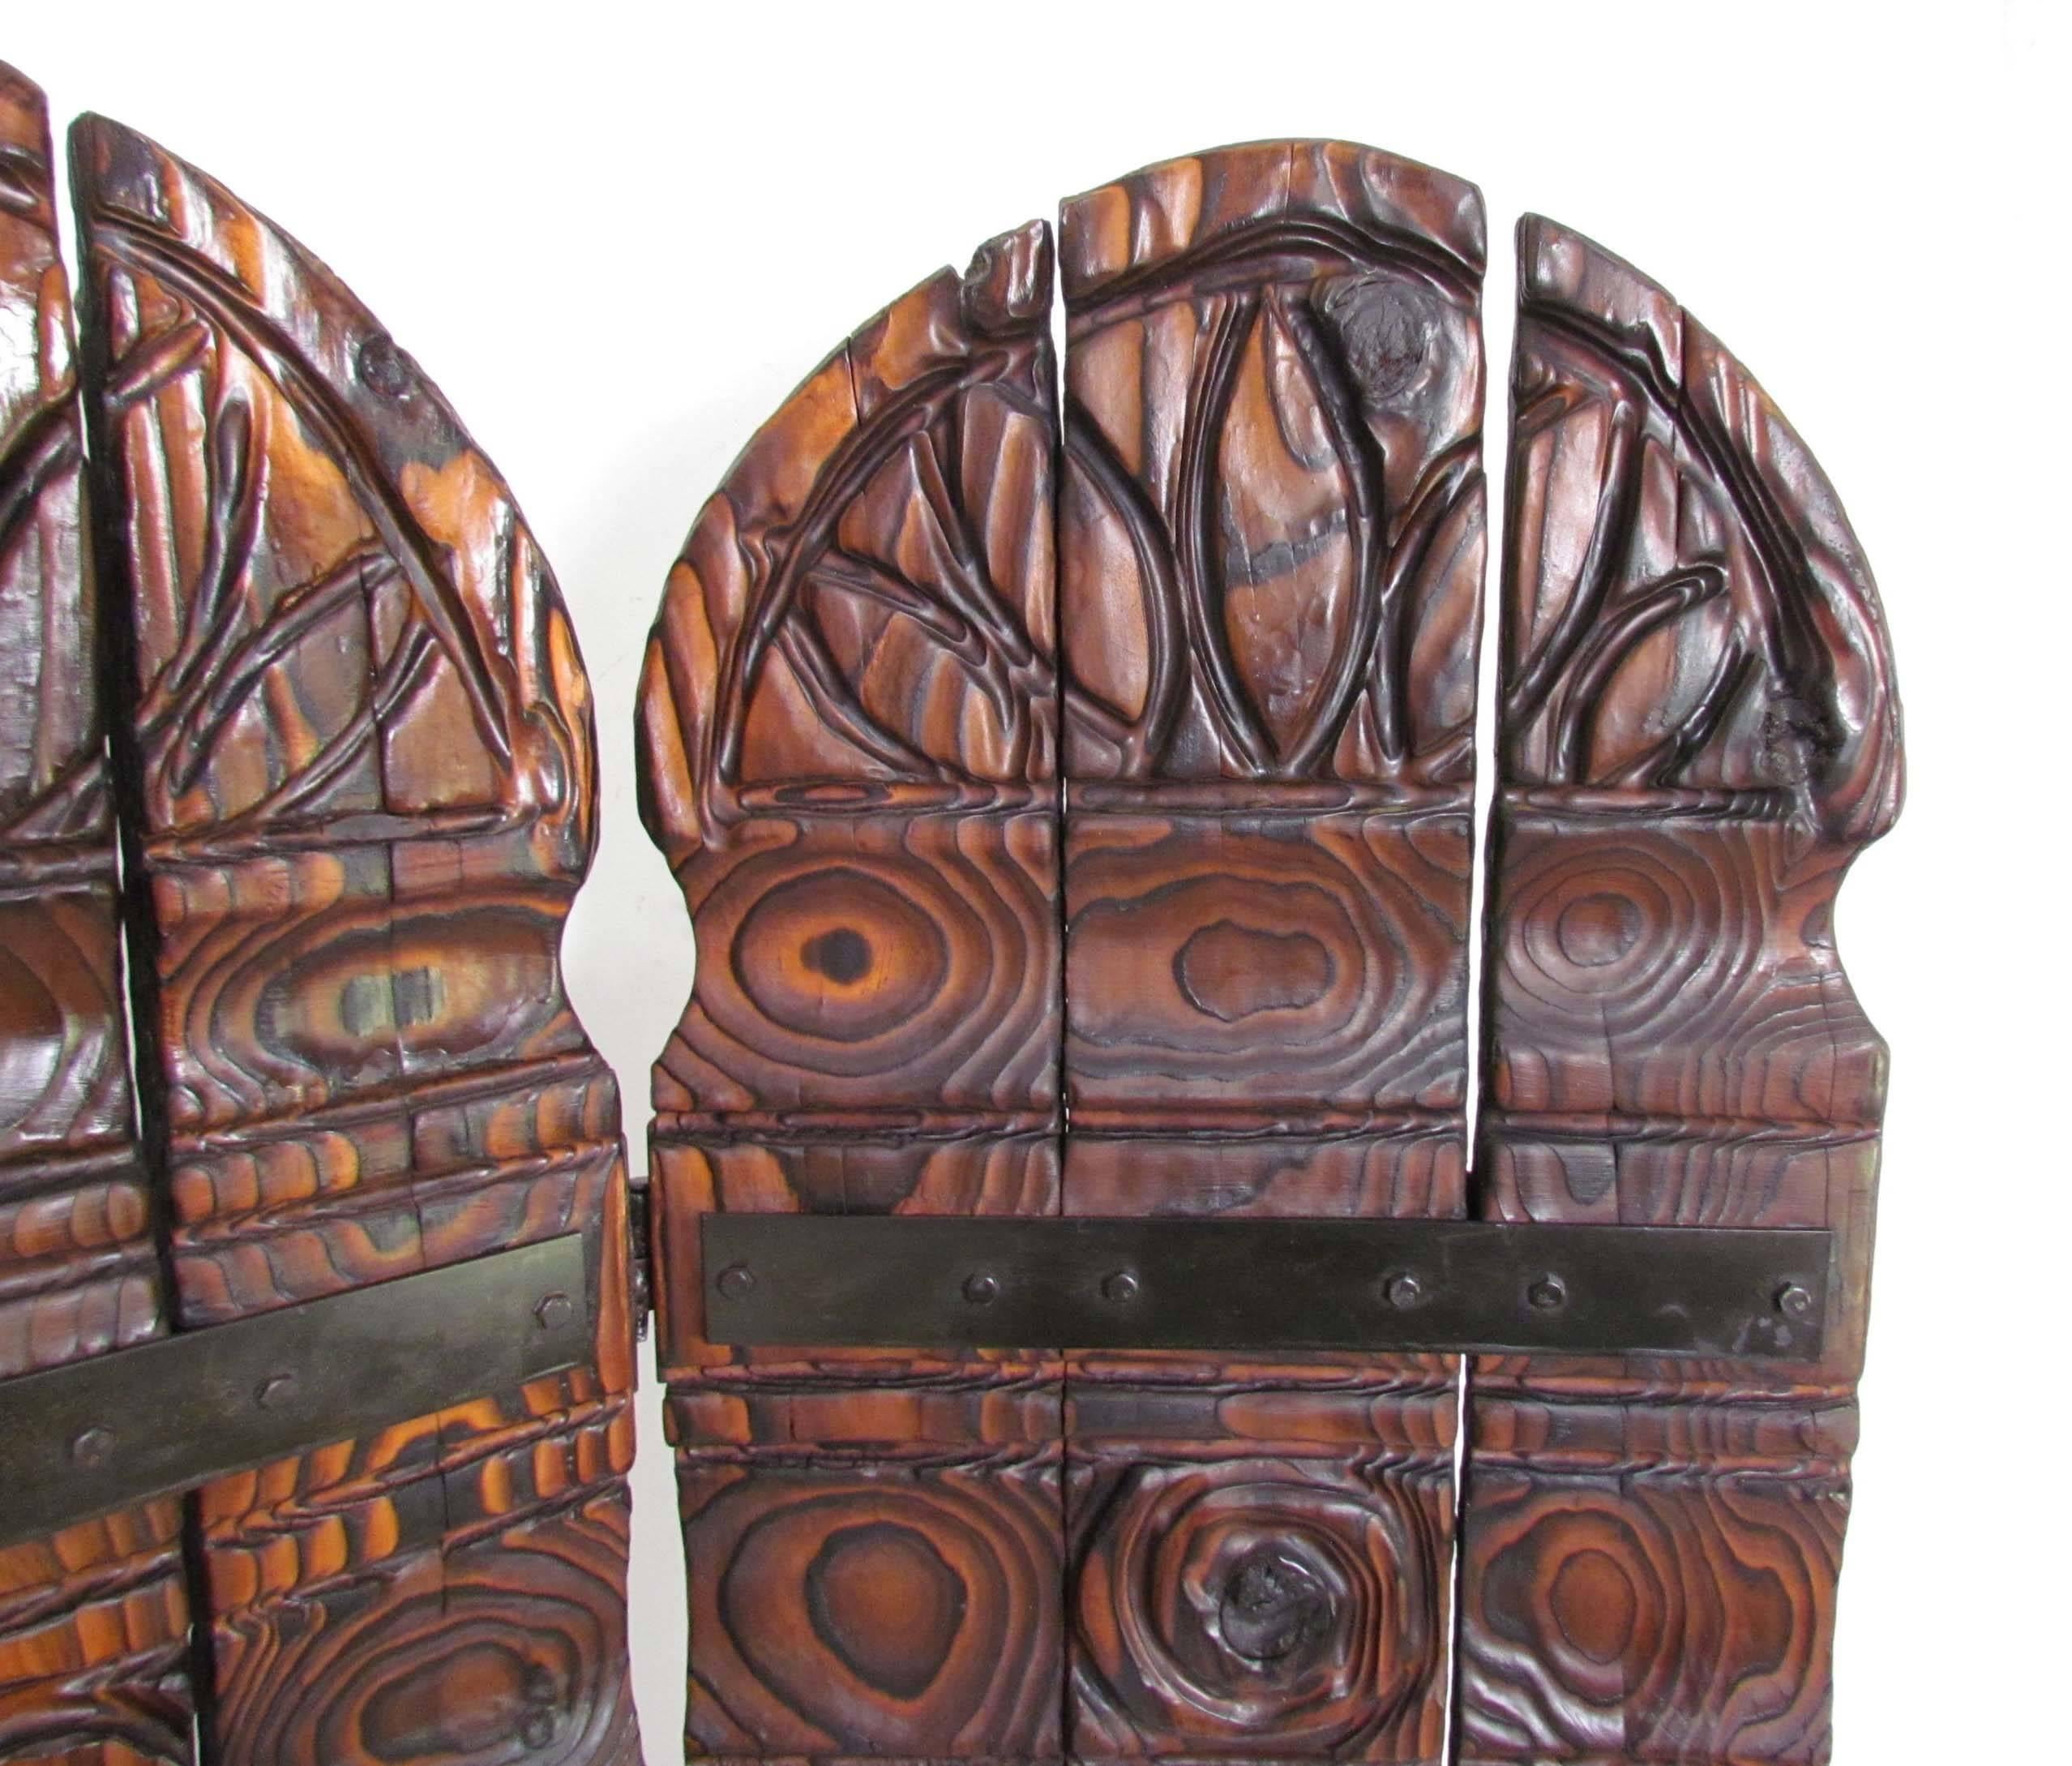 Hand-Carved Witco Tiki Carved Wood Three-Panel Screen or Room Divider, circa 1960s